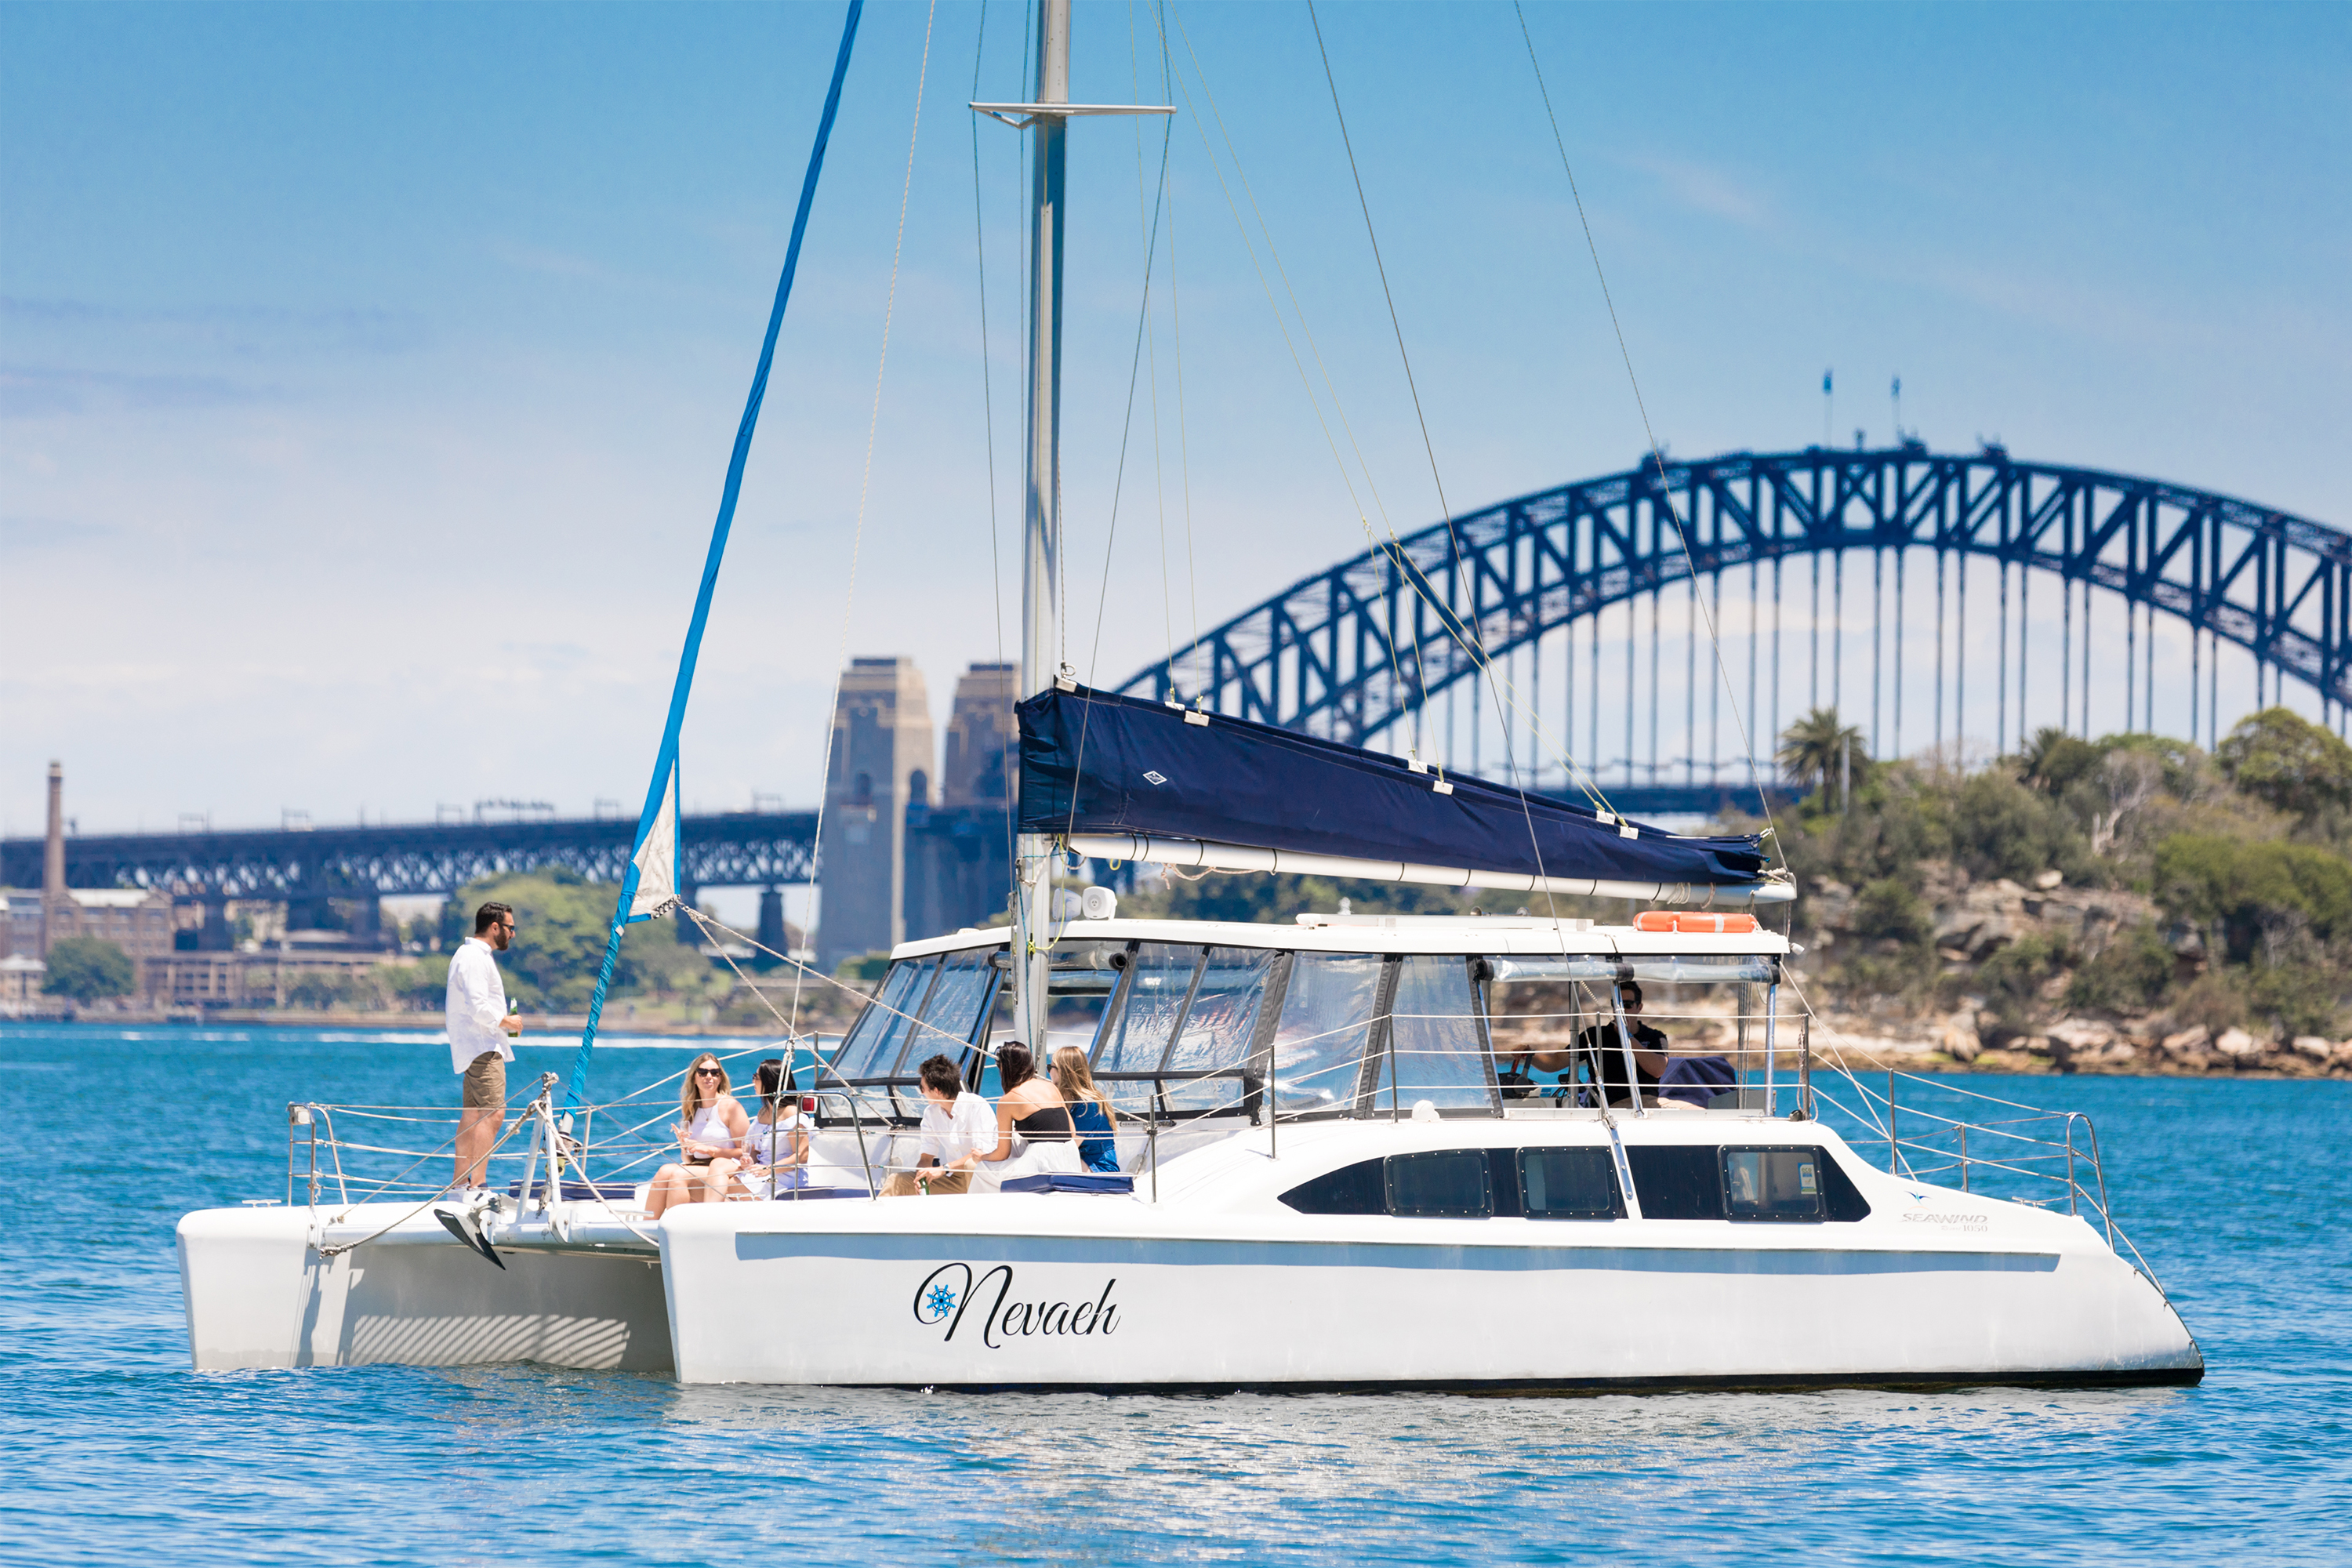 Harbour Romance Sunset Cruise For Two with Seafood Dinner 